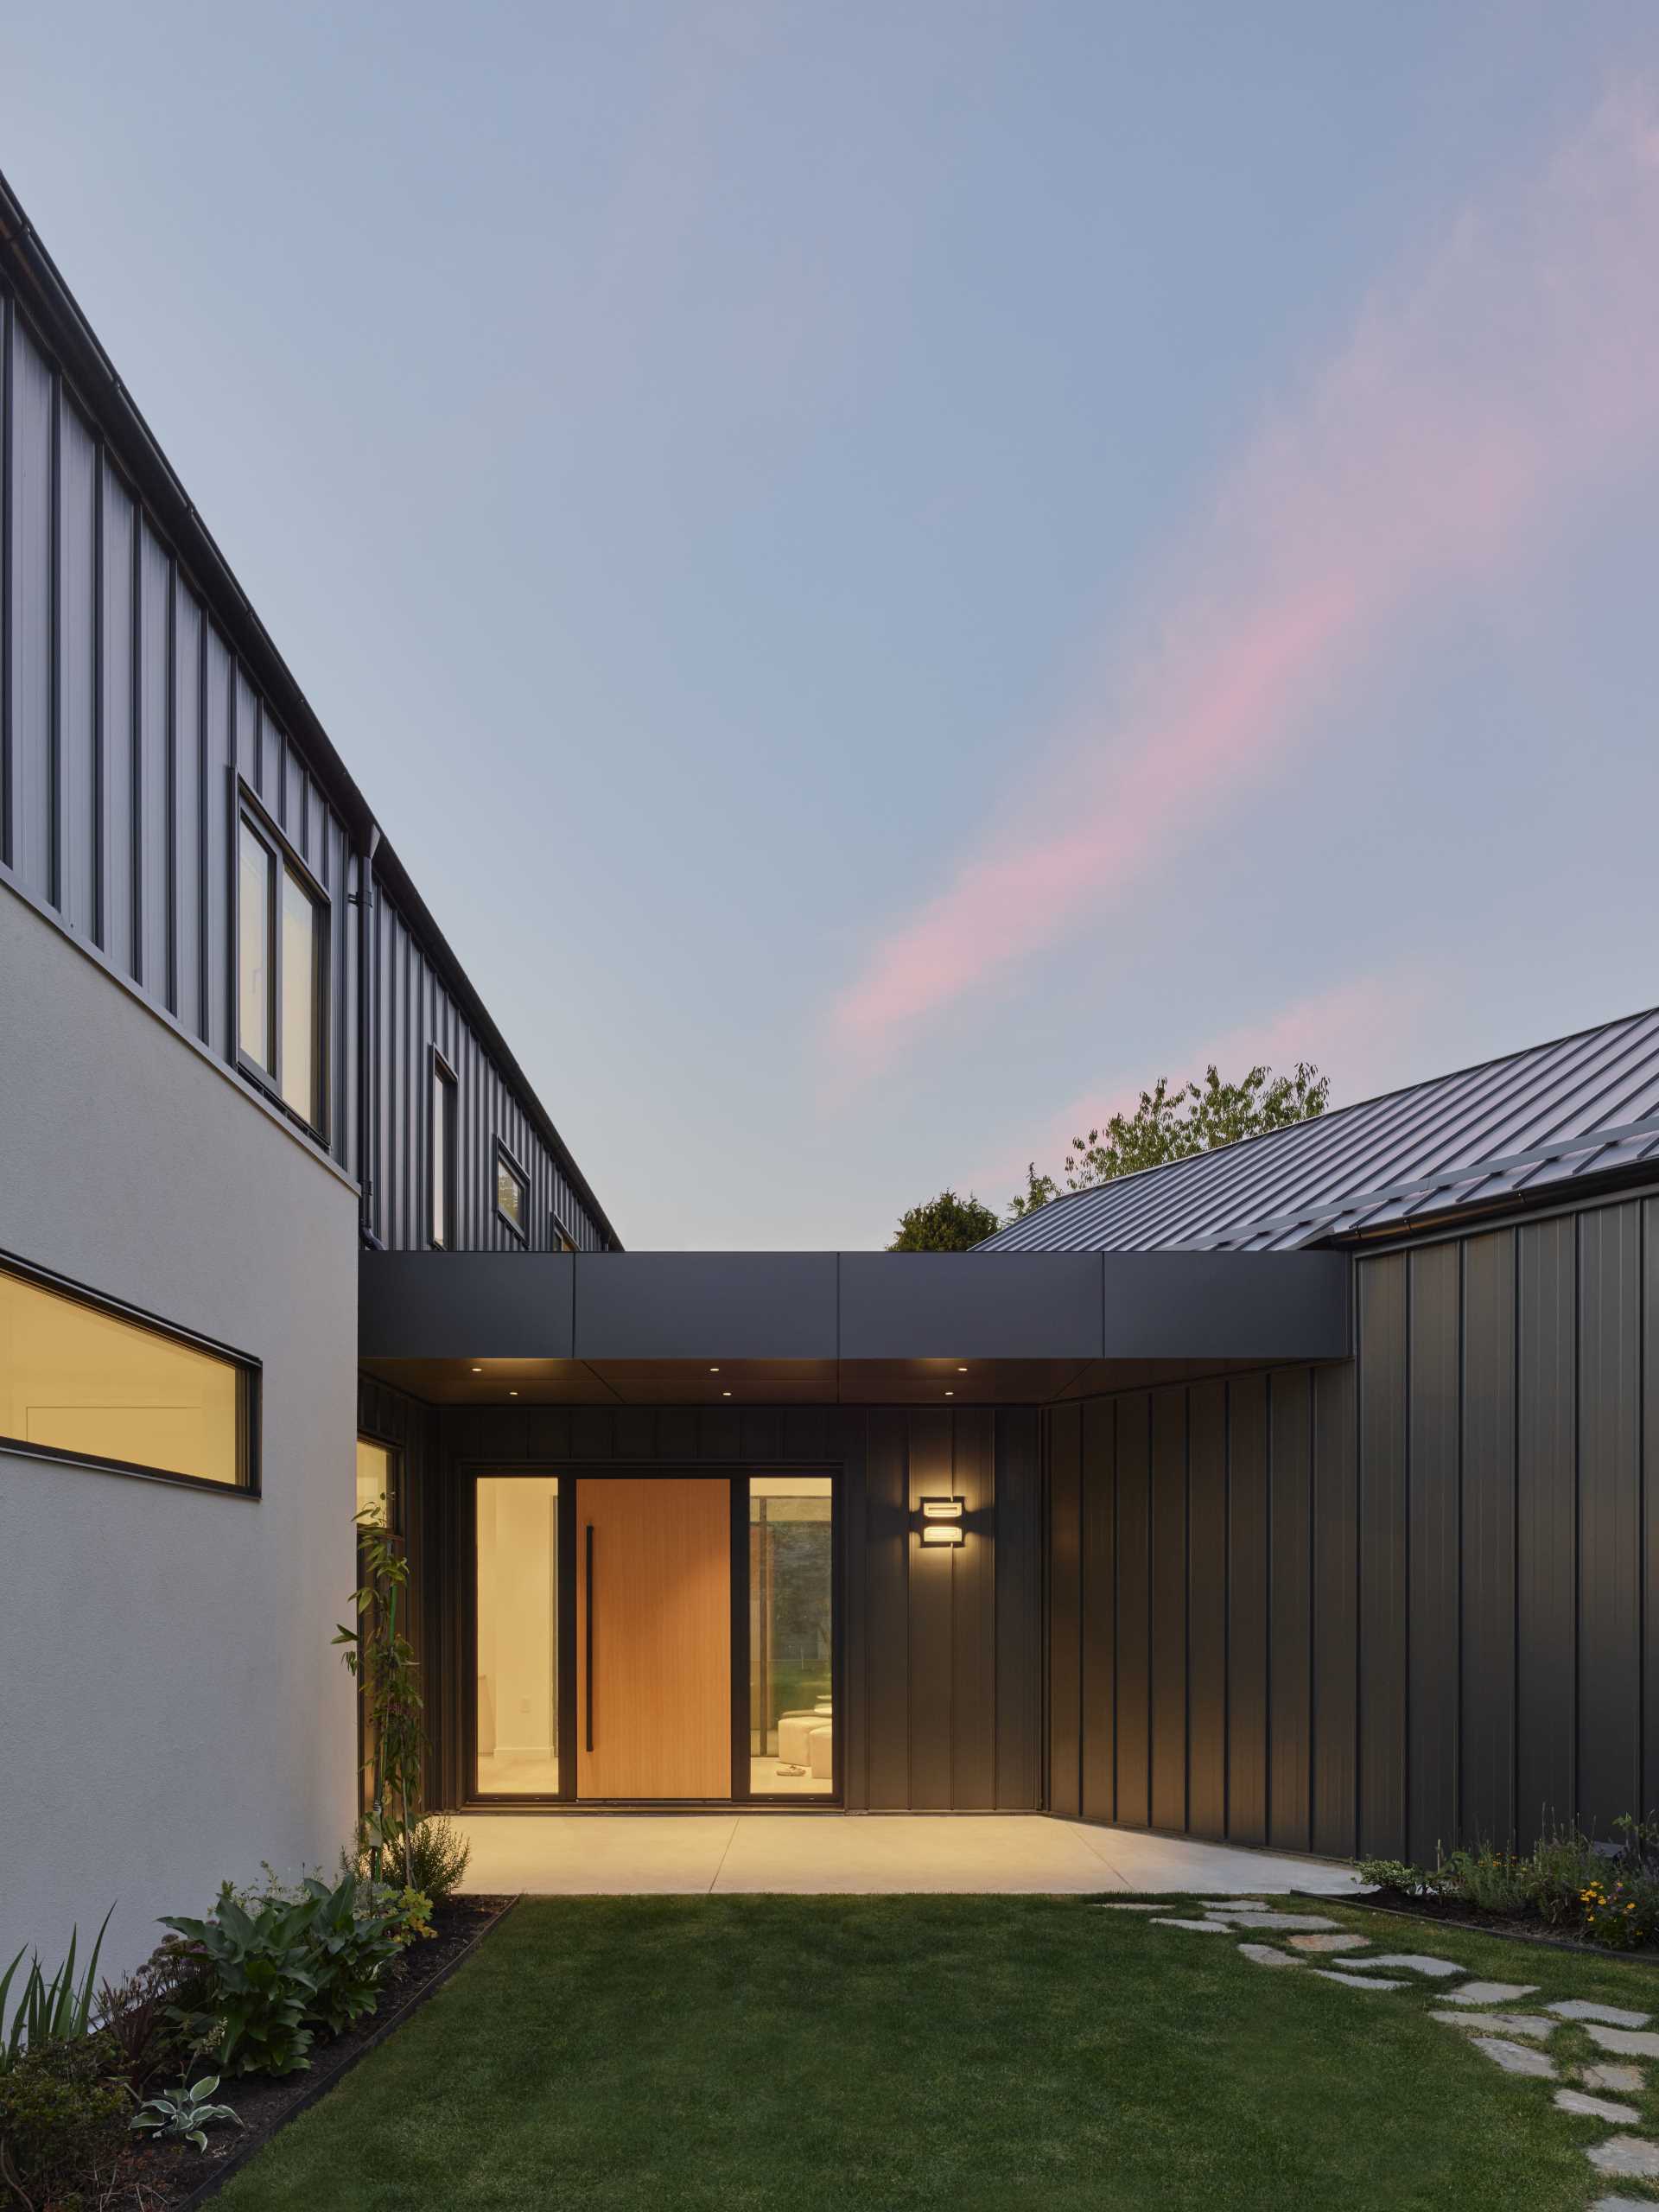 The front door of this modern home opens to the glass hallway, with windows providing a glimpse of the yard.